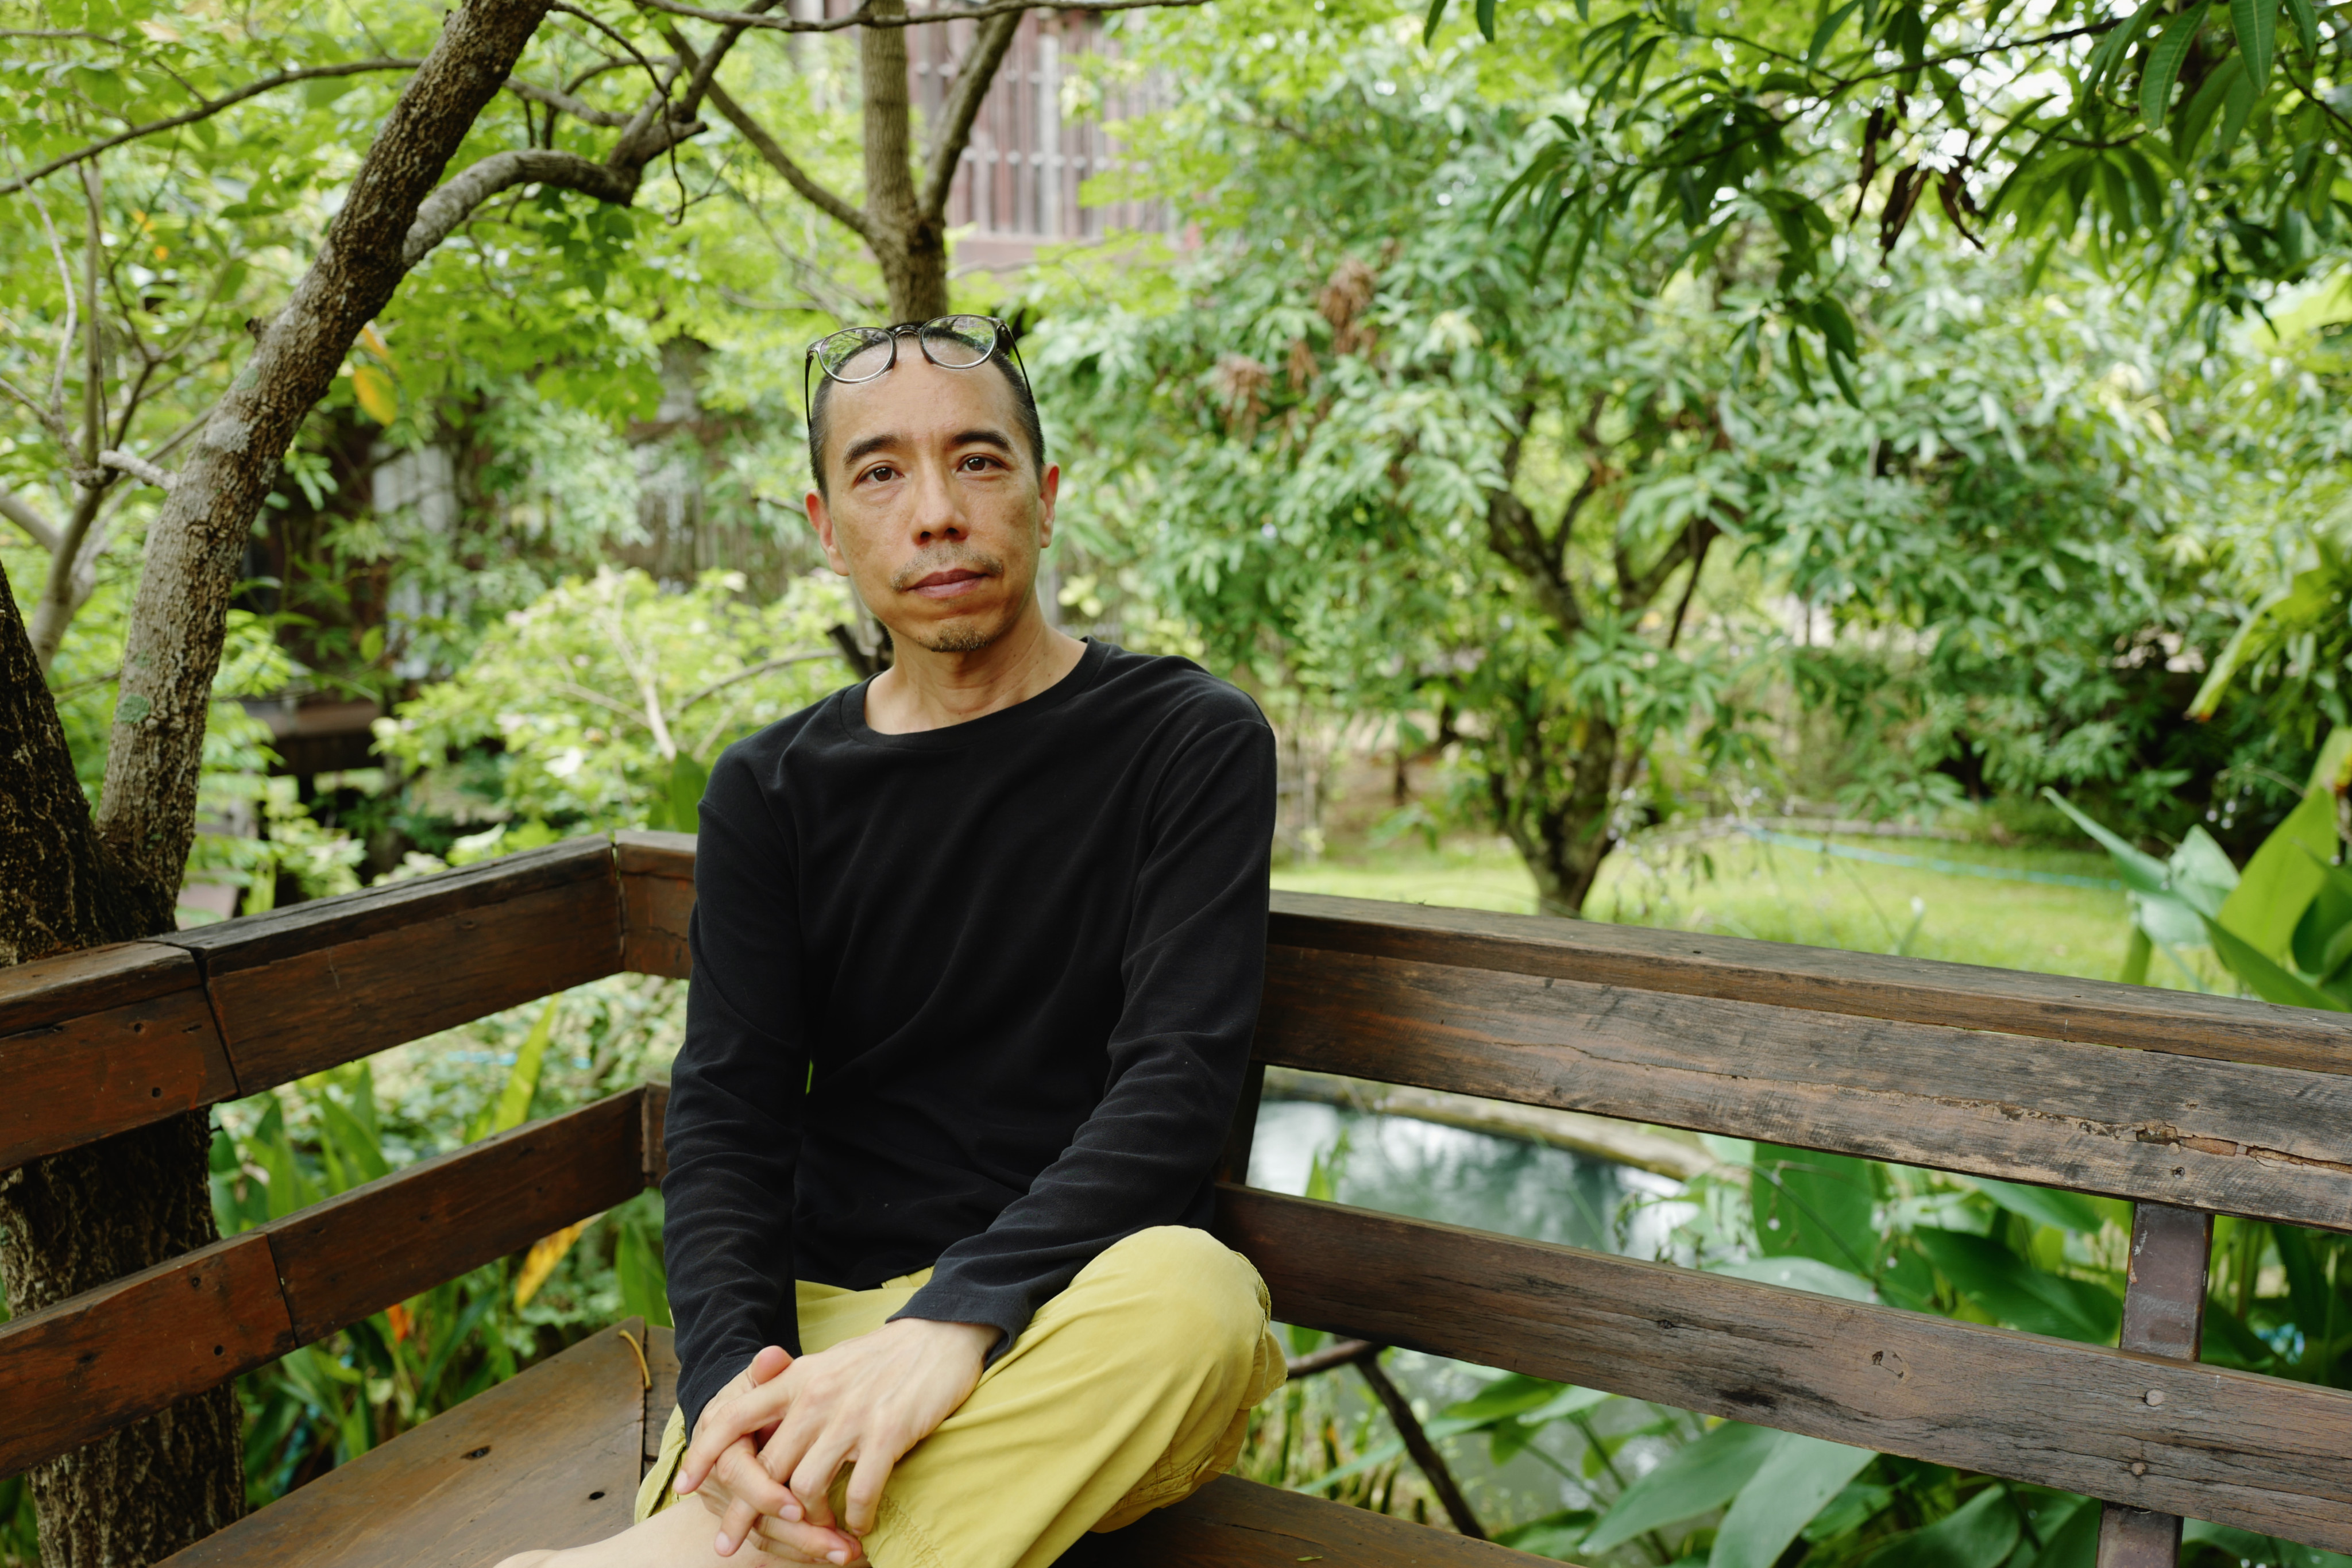 Thai filmmaker Apichatpong Weerasethakul’s new Hong Kong exhibition, ‘A Planet of Silence’, promotes a ‘connection and an awareness of oneness’.